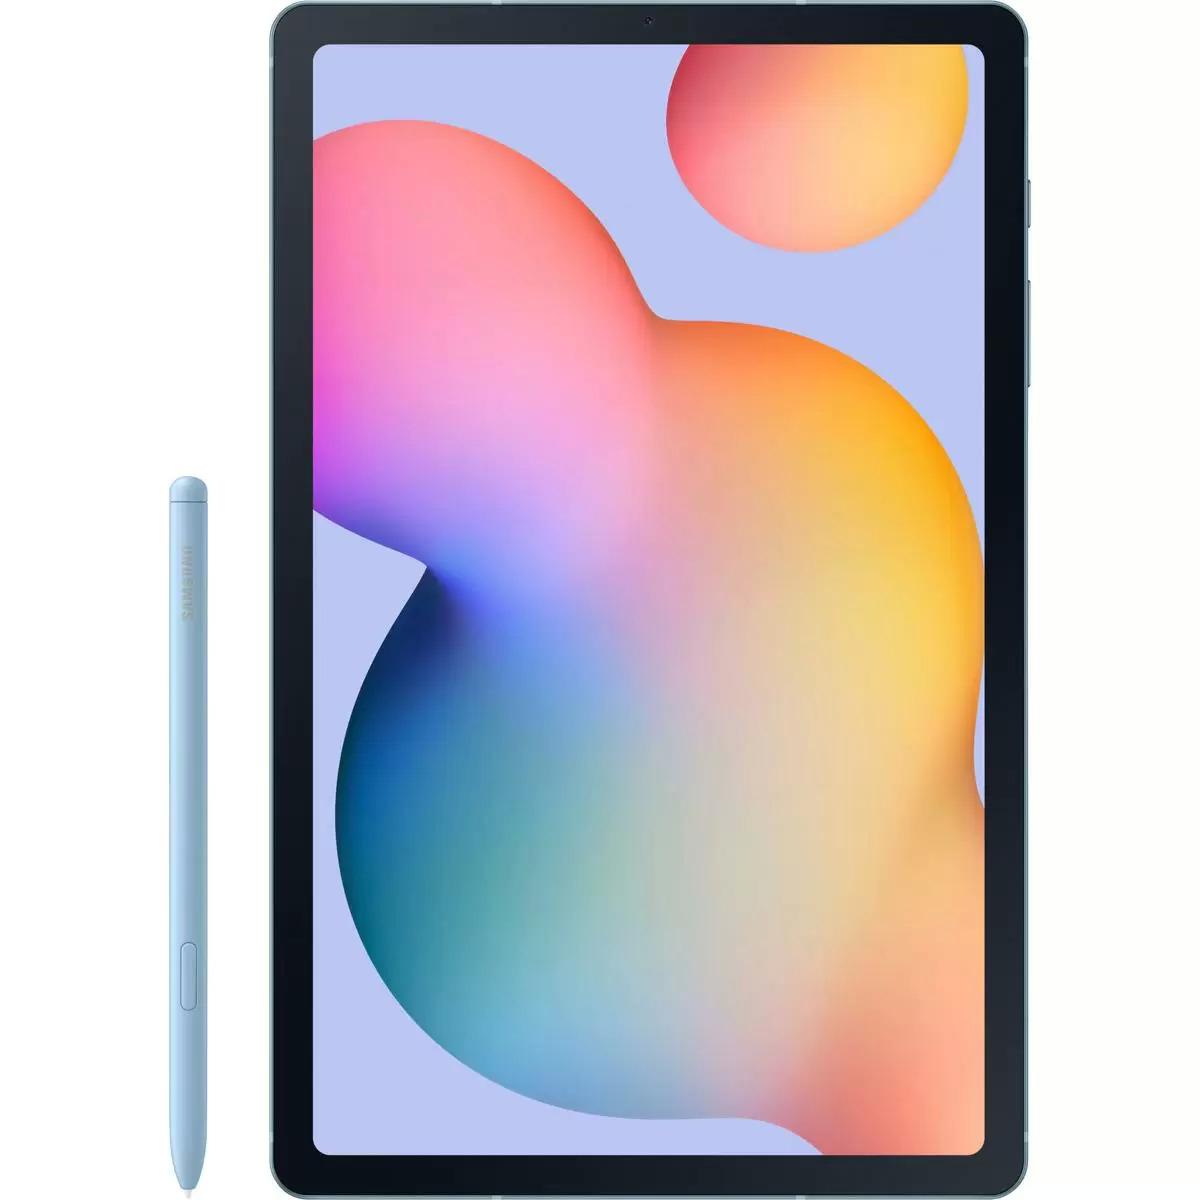 Samsung Galaxy Tab S6 Lite 10.4in 64GB Wifi Tablet with S Pen for $229.99 Shipped